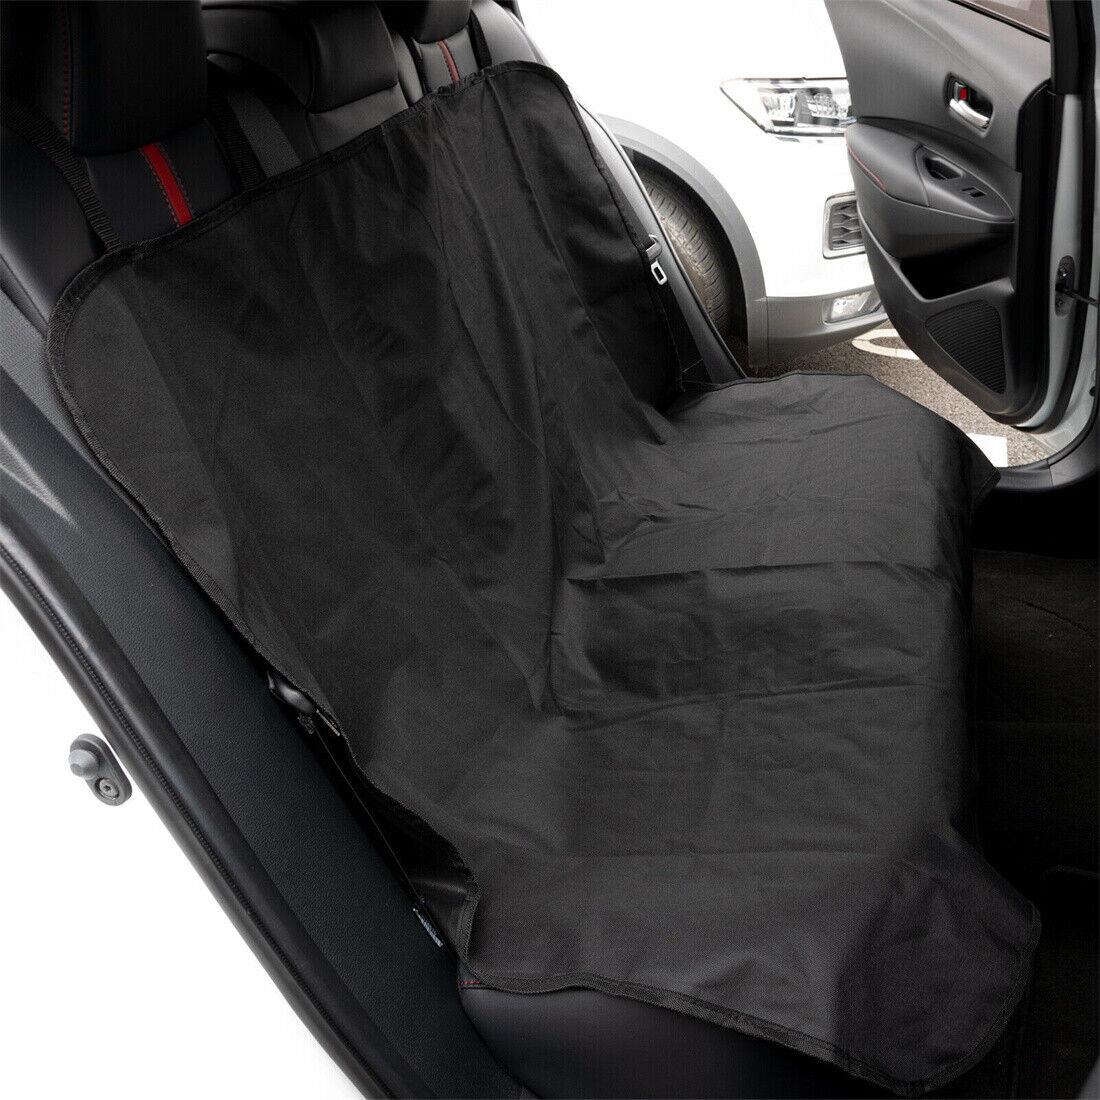 Pet Car Rear Seat Cover Waterproof and Nonslip by GEEZY - The Magic Toy Shop